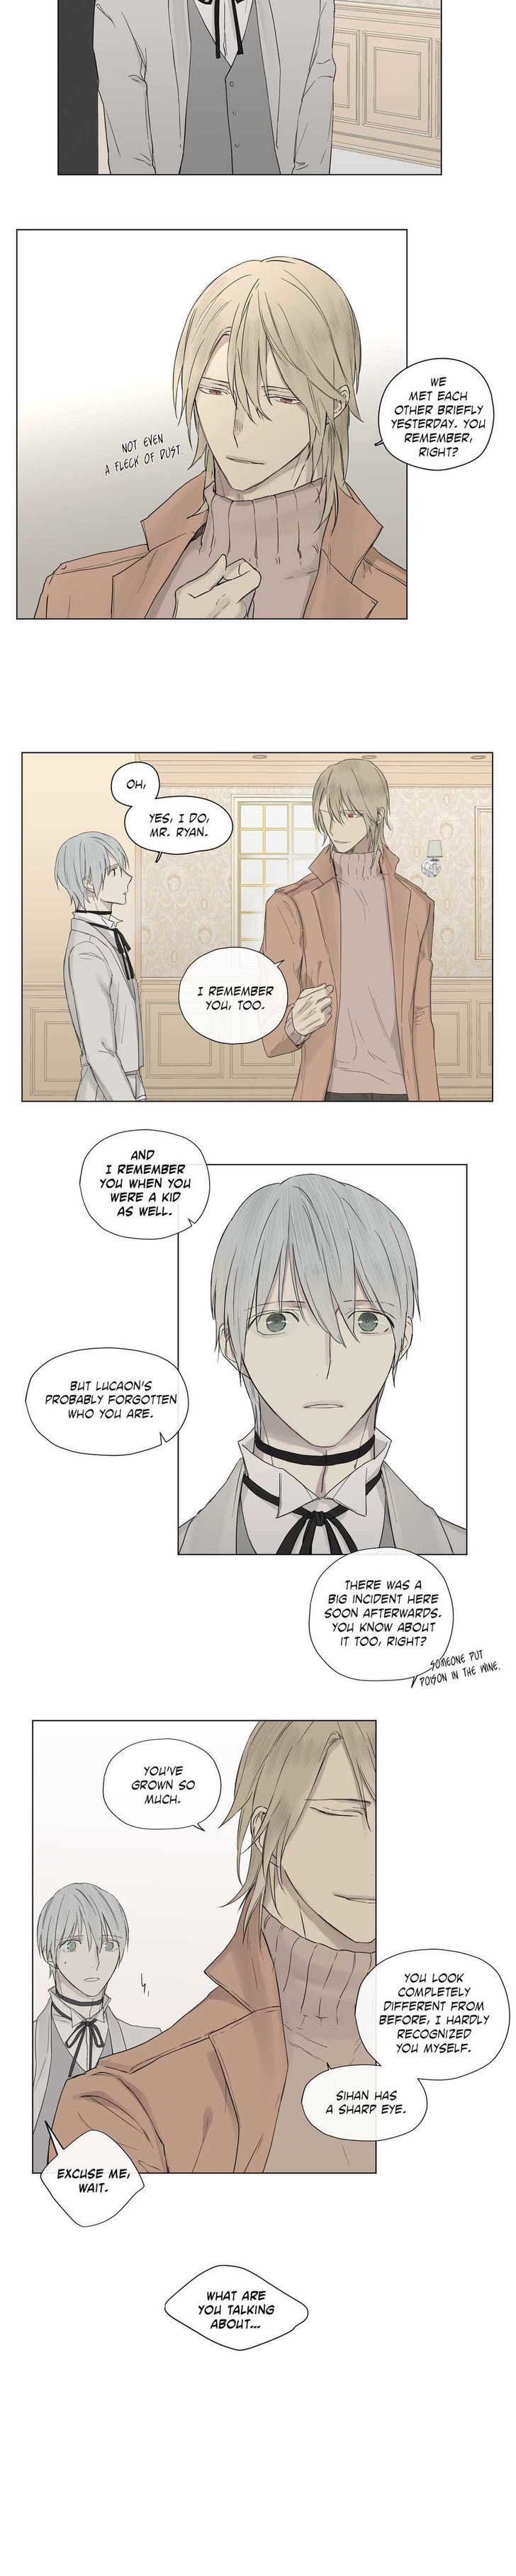 Royal Servant - Chapter 13 Page 4